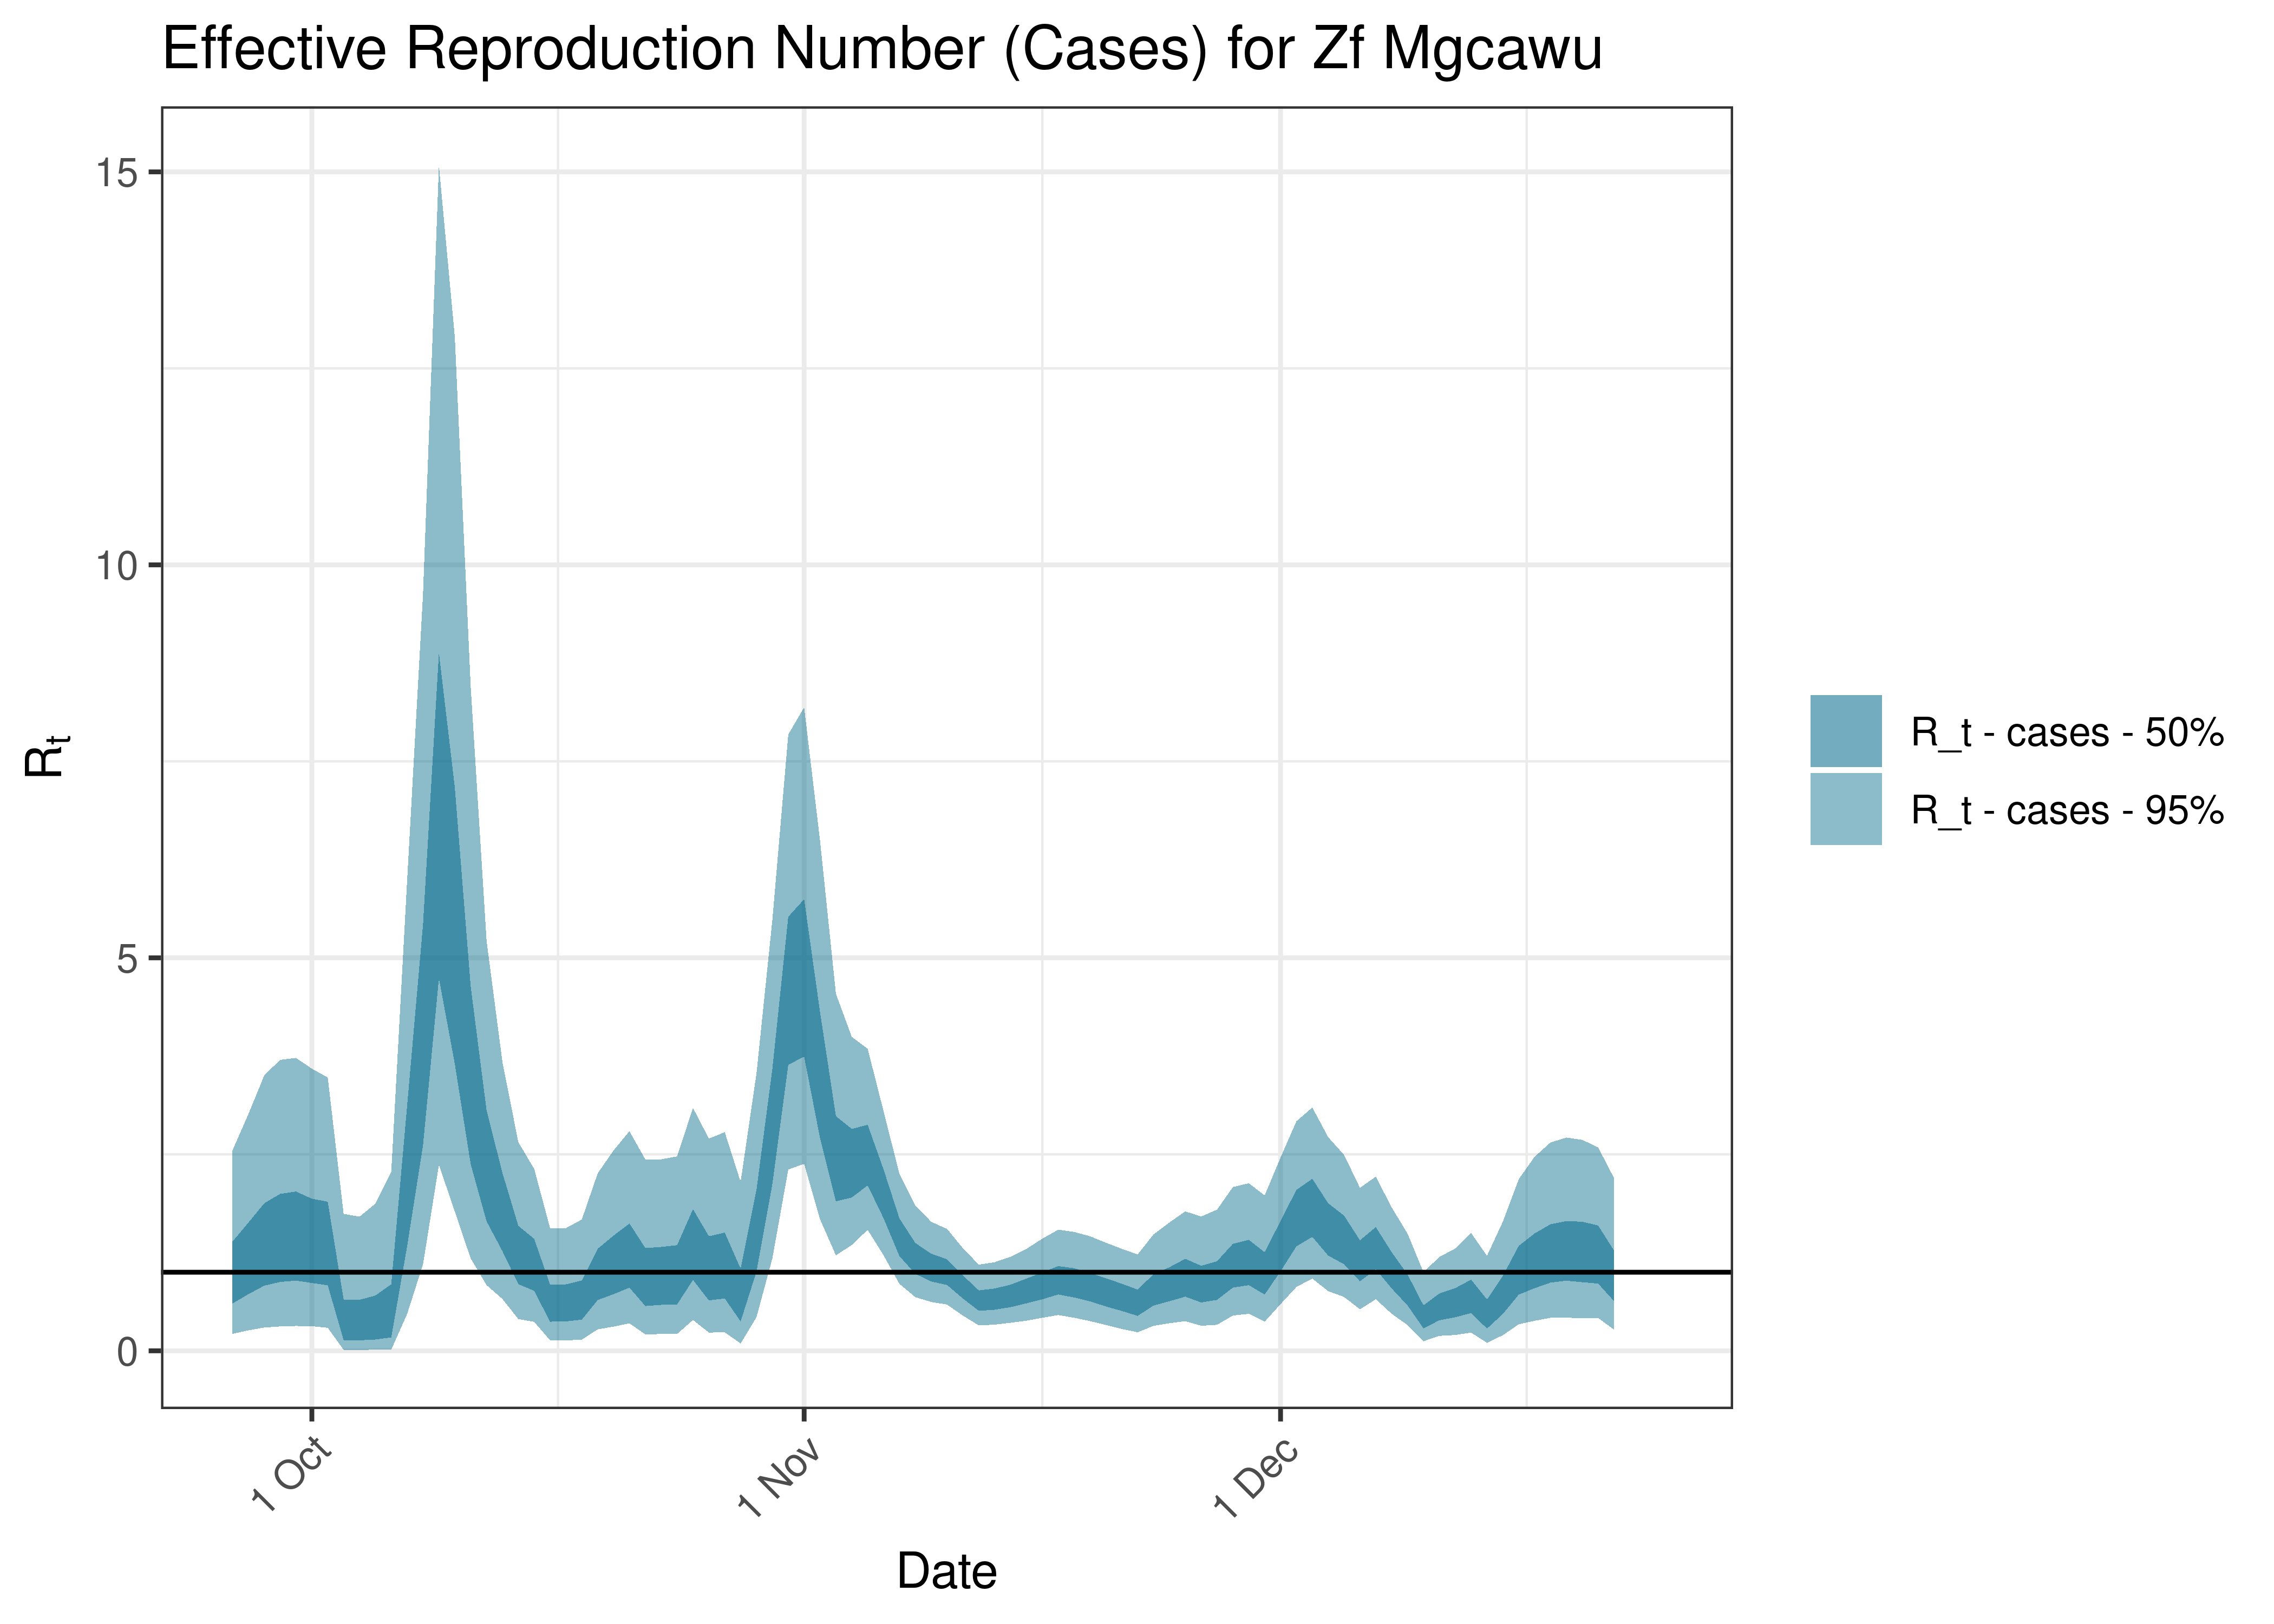 Estimated Effective Reproduction Number Based on Cases for Zf Mgcawu over last 90 days